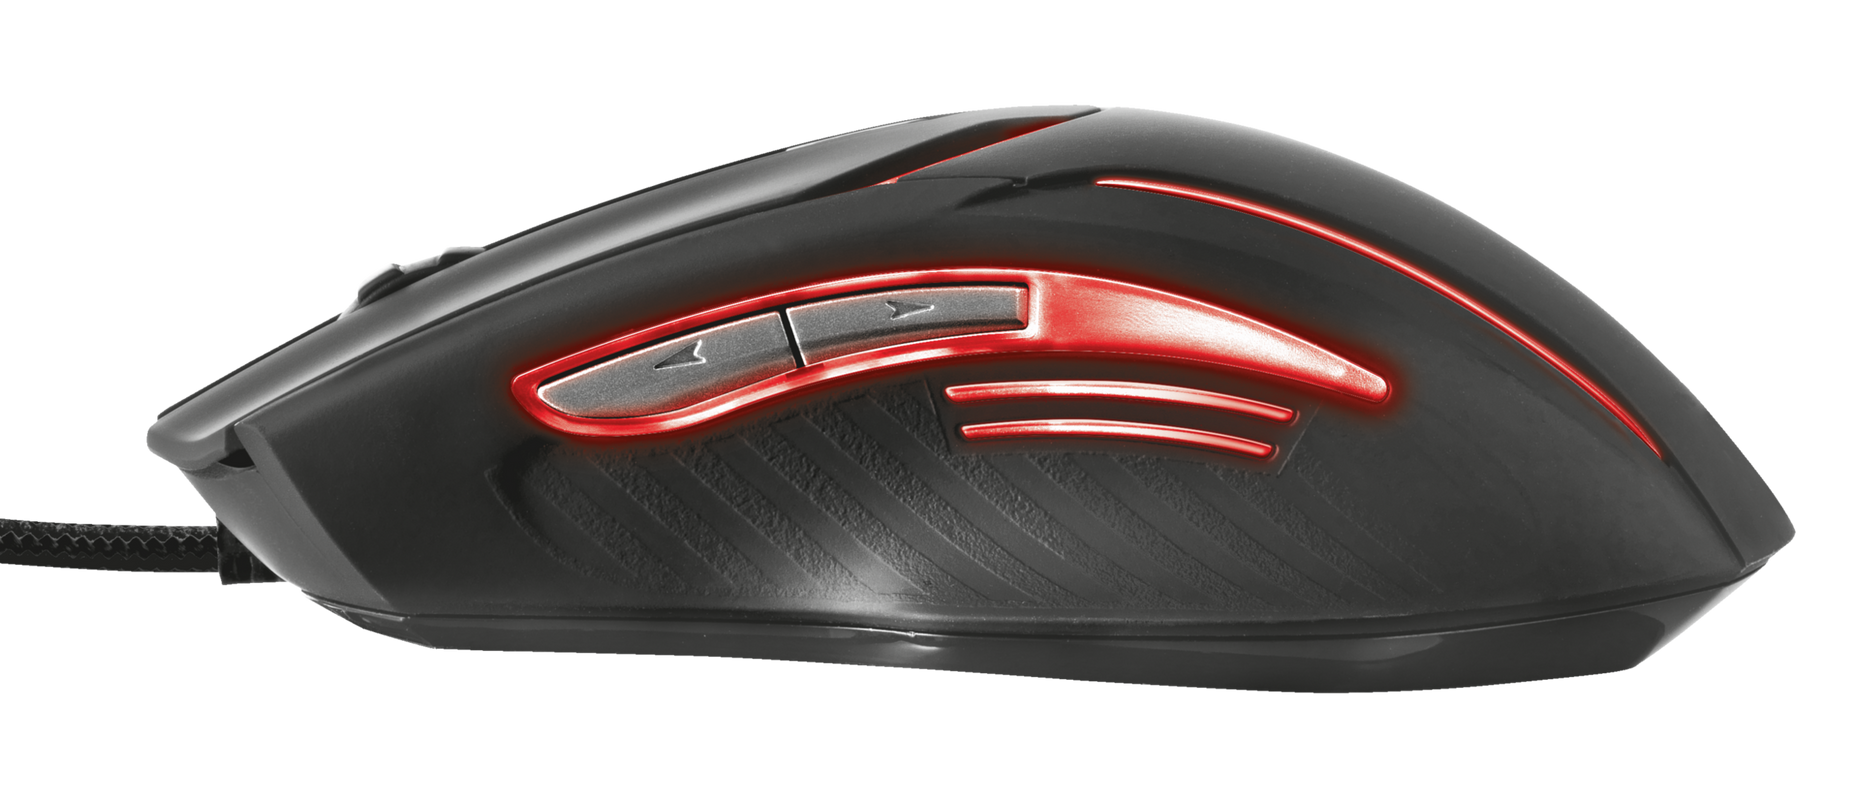 GXT 152 Exent Illuminated Gaming Mouse-Side